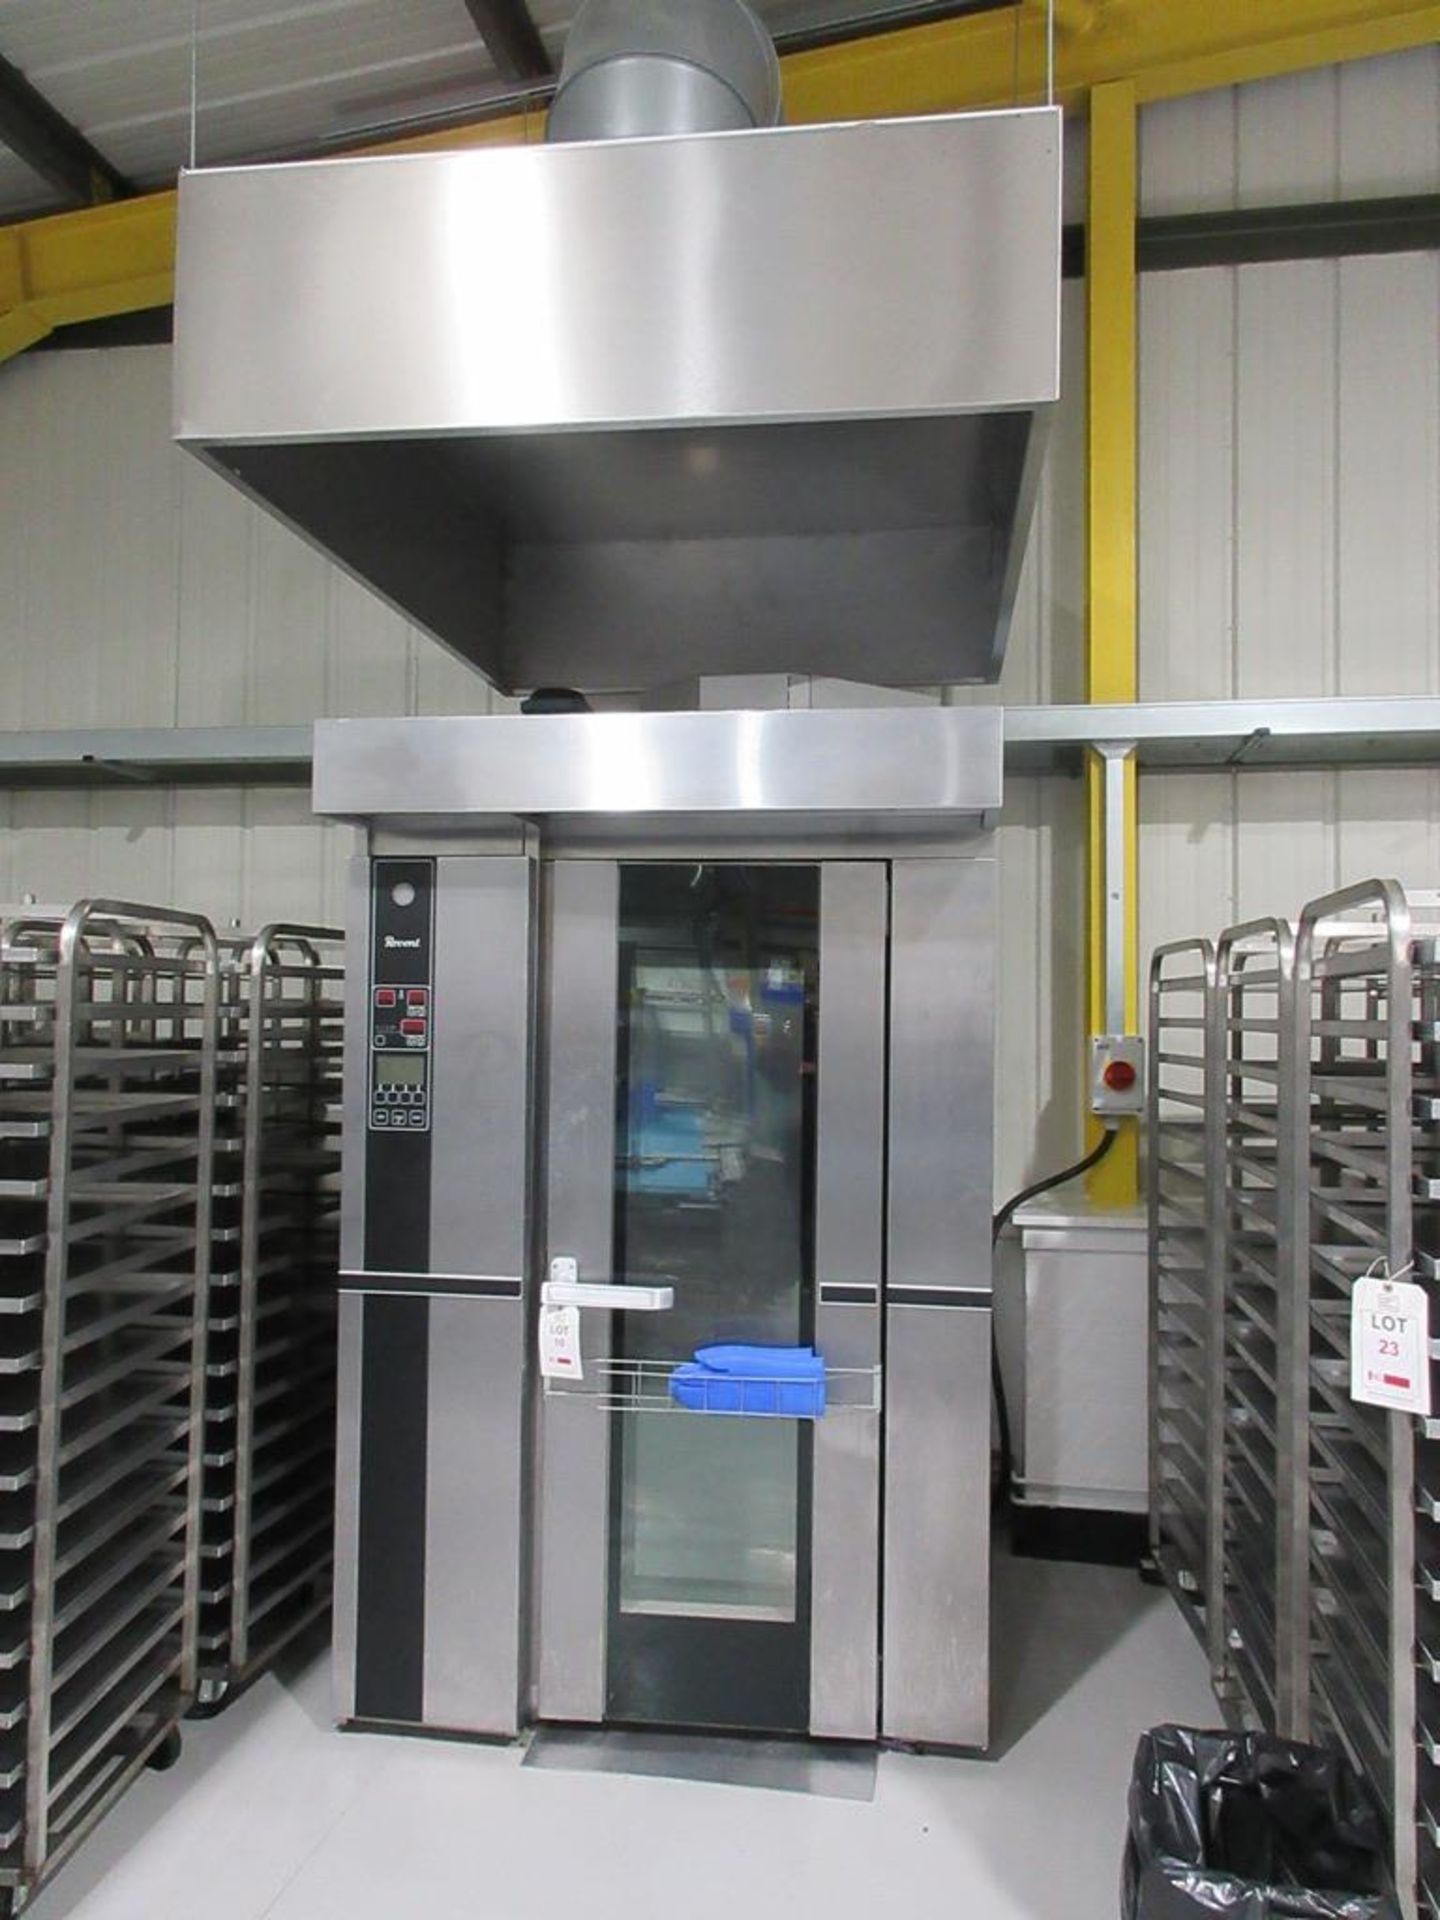 Revent stainless steel electric single rack rotary oven, type 726 EL, serial no. 09.2641.160,